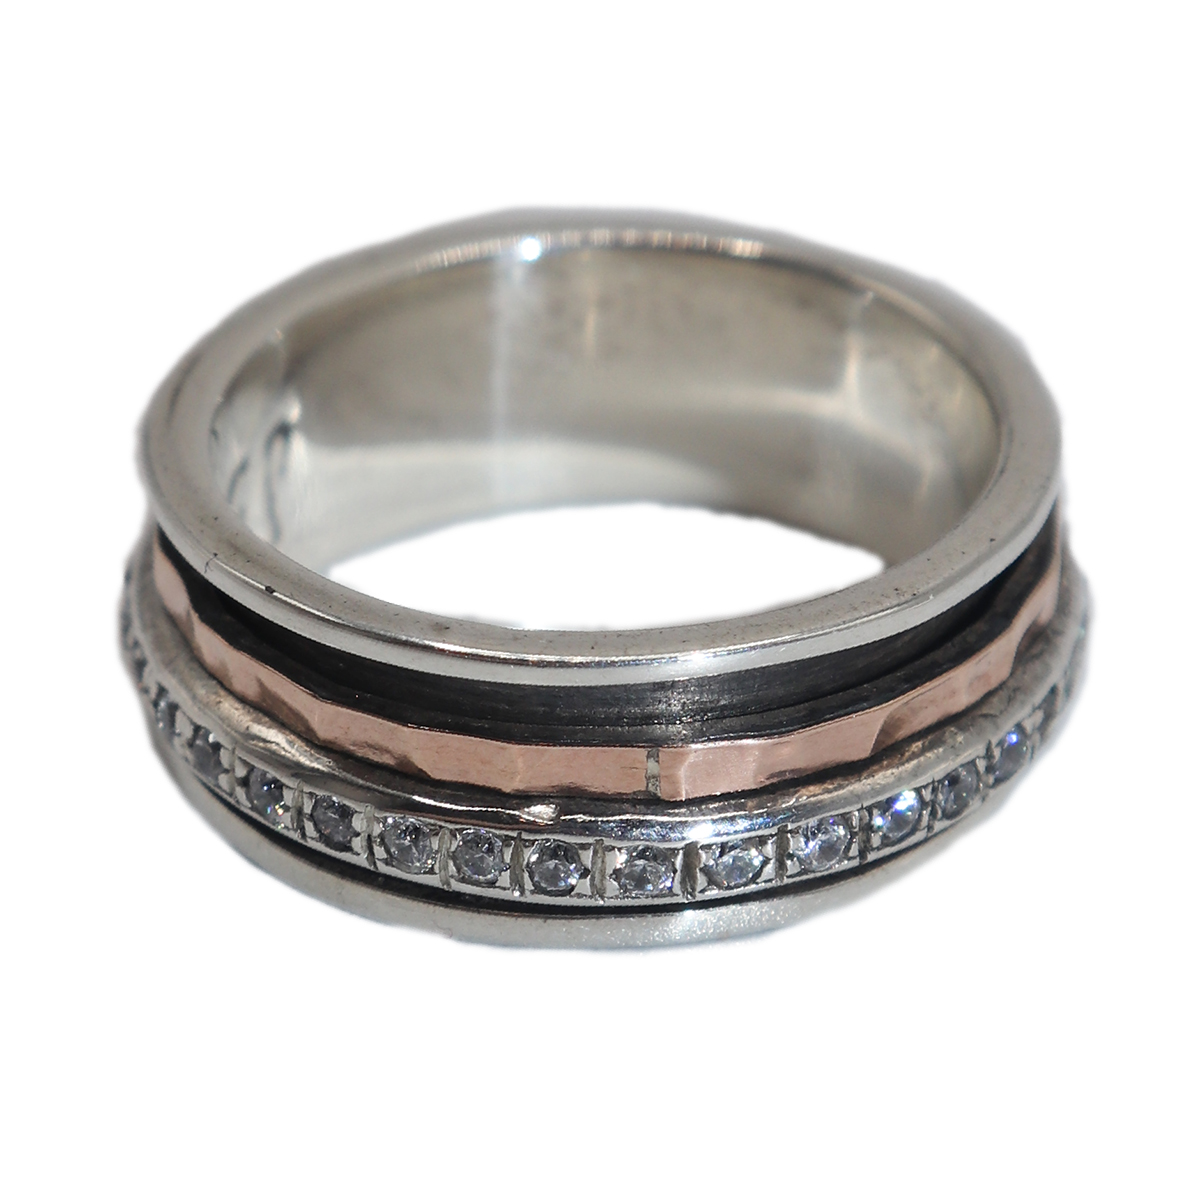 ITHIL METALWORKS - SILVER & 9K GOLD SPINNER RING W/ CZ - SILVER - 8